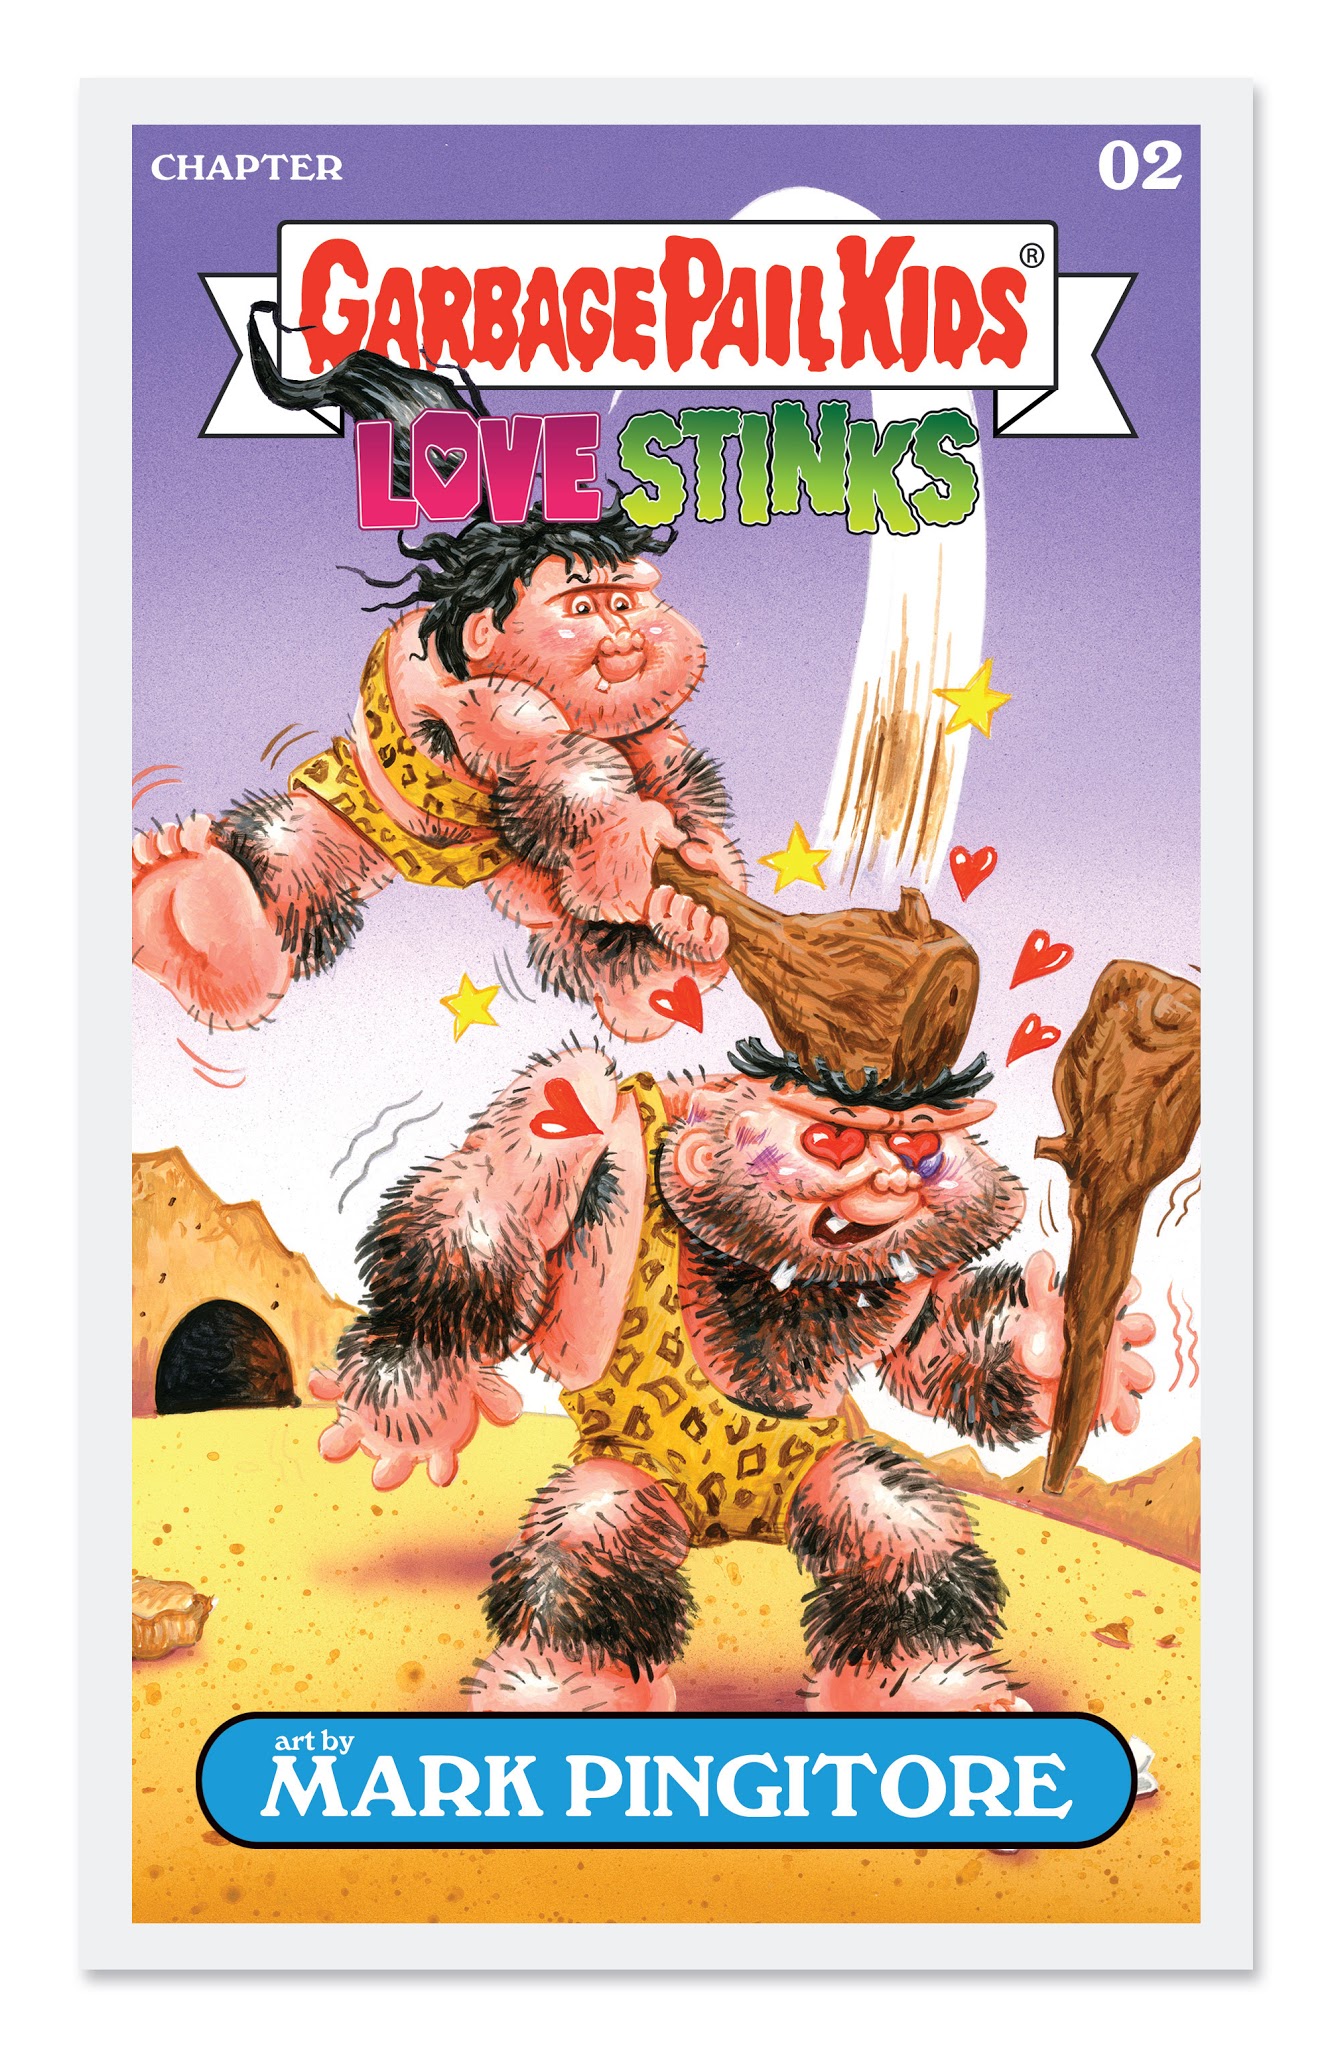 Read online Garbage Pail Kids comic -  Issue # TPB - 28